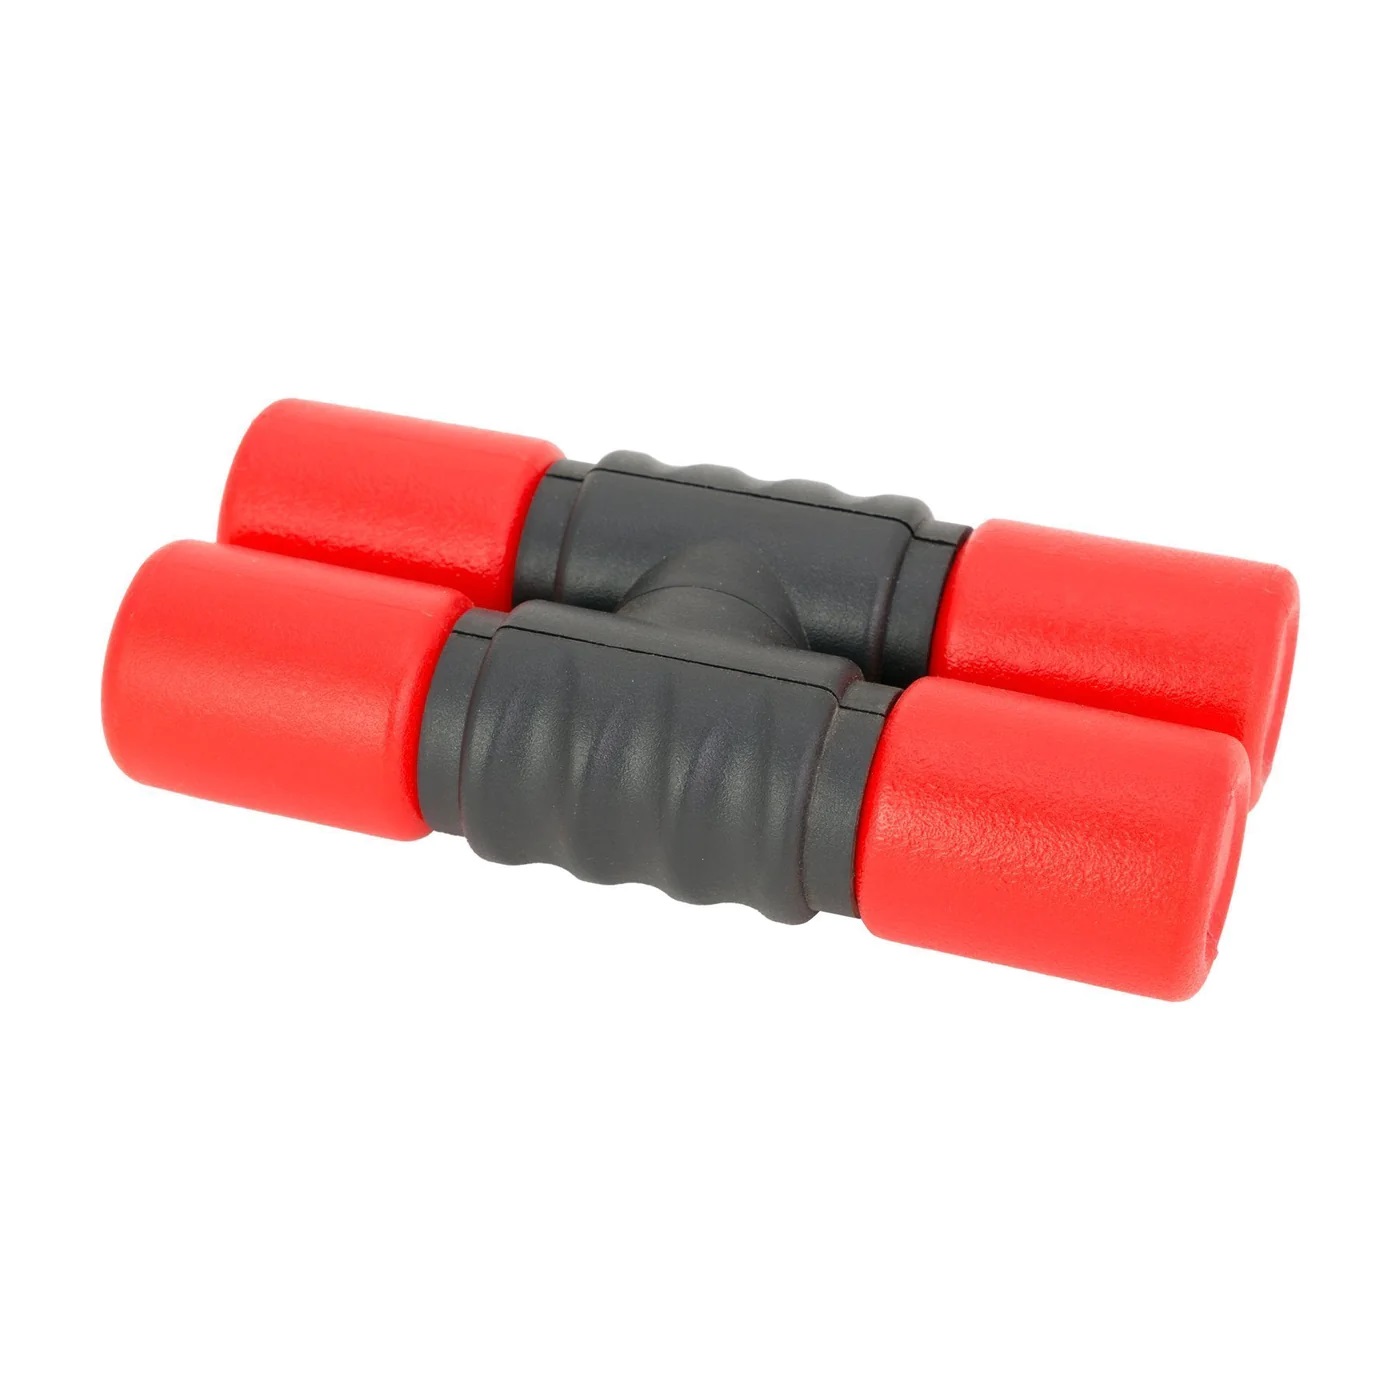 Gammon Double Tube(Row) Twist Shaker Hand Percussion For Performance(Red)